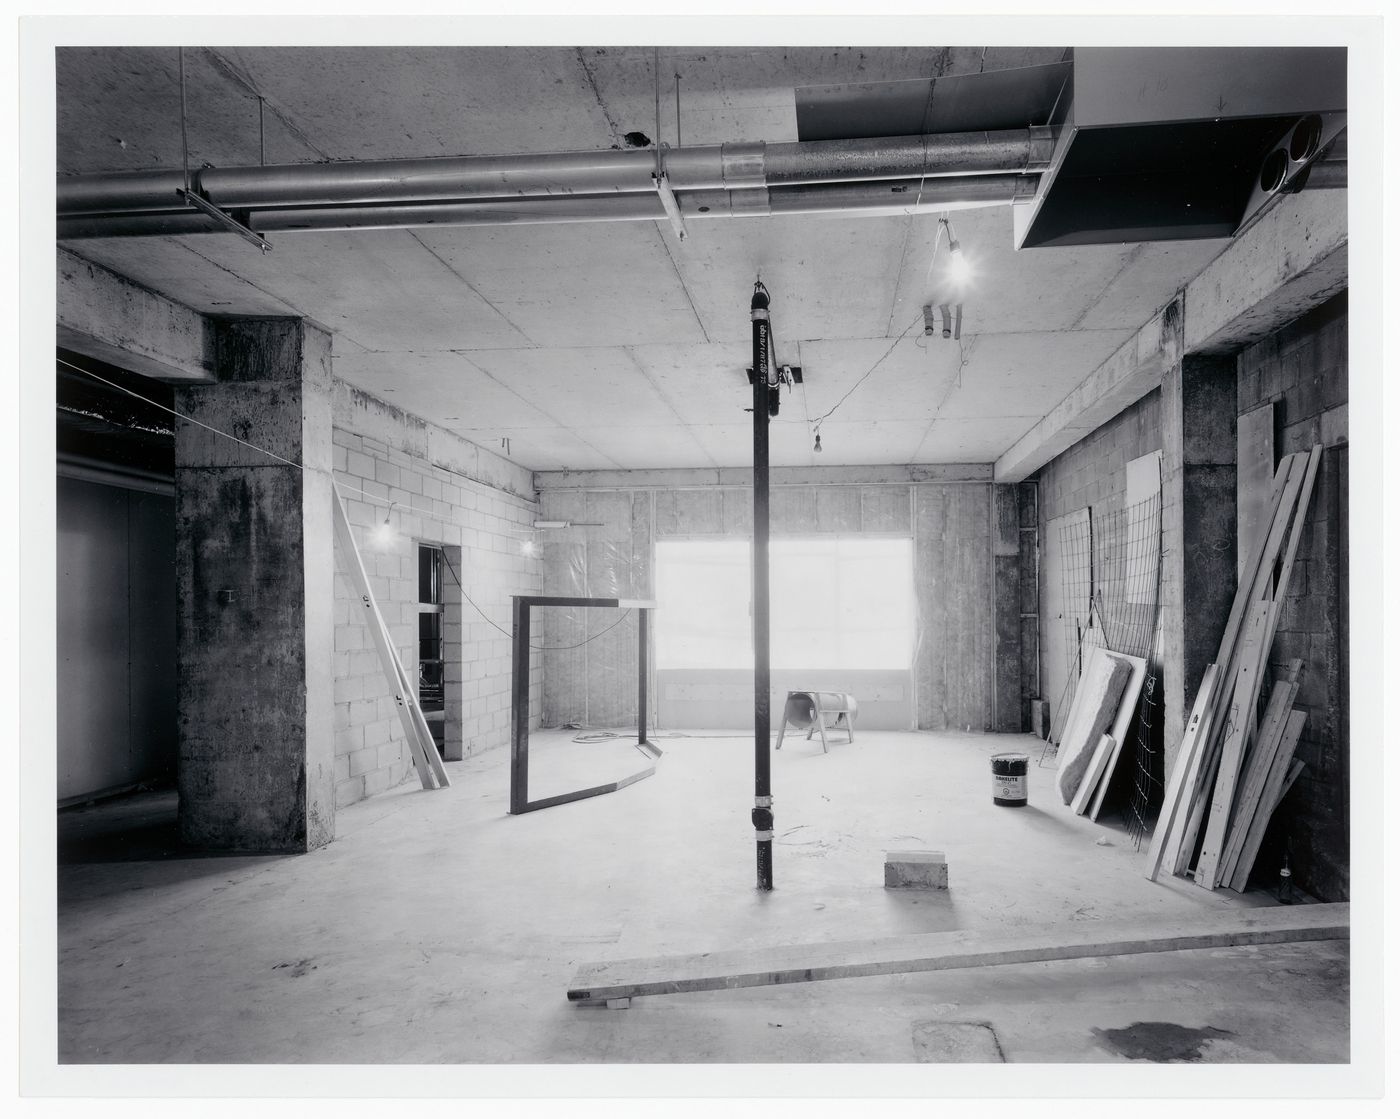 Interior view of the curatorial level [?] showing a window opening, a window frame prior to installation, and pipes, Canadian Centre for Architecture under construction, Montréal, Québec